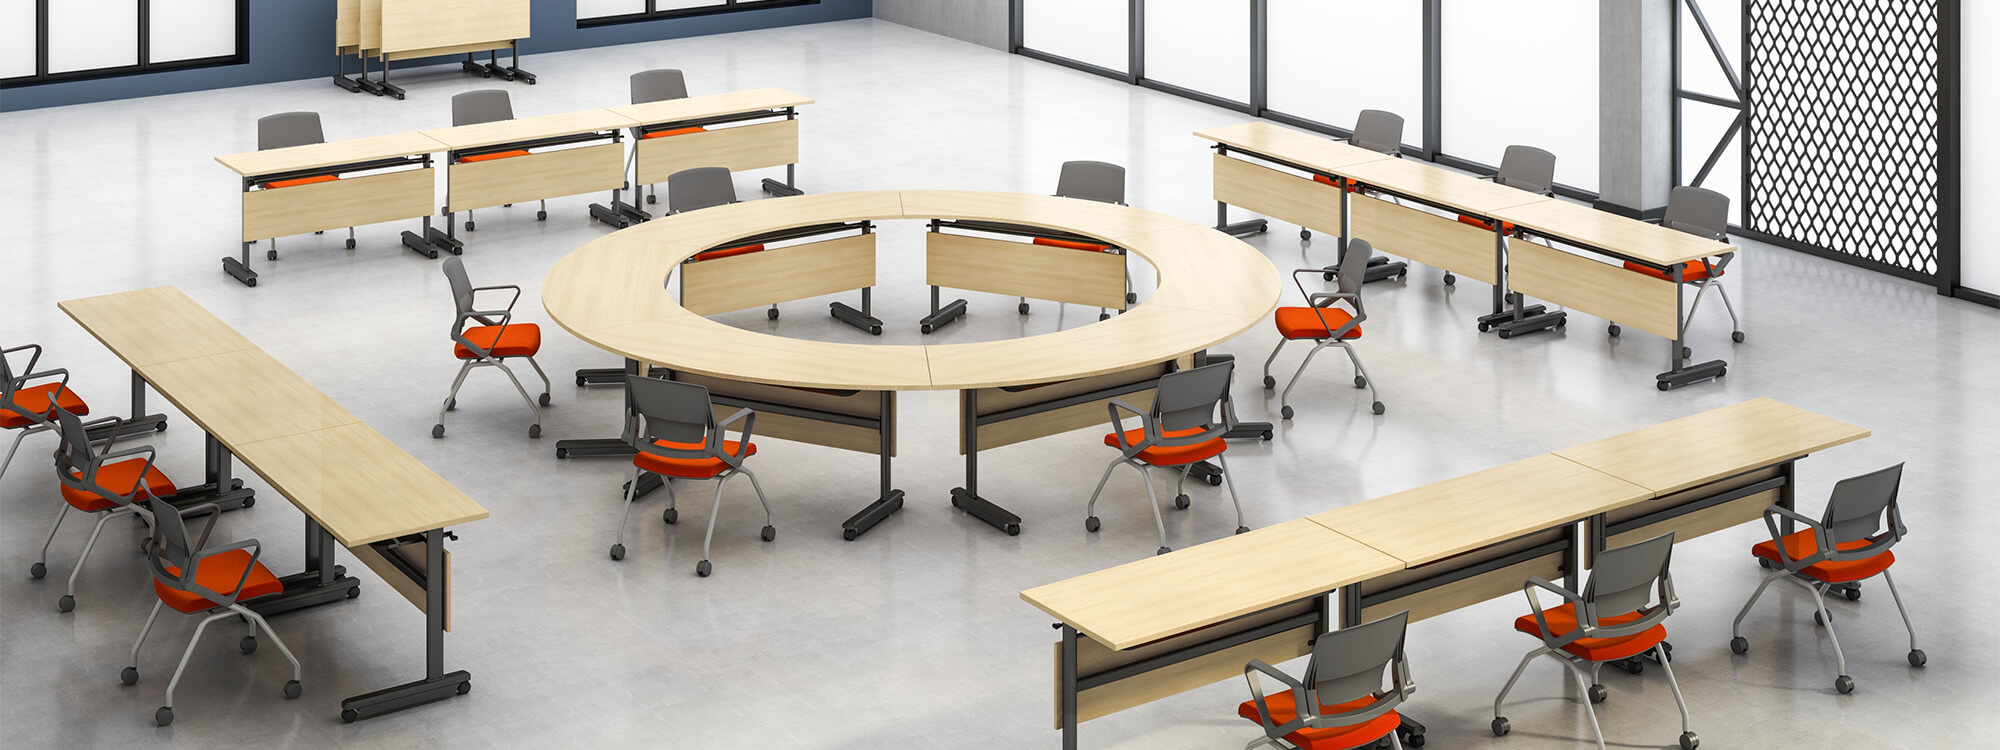 Can be composed of round and rectangular wooden training tables and movable desks